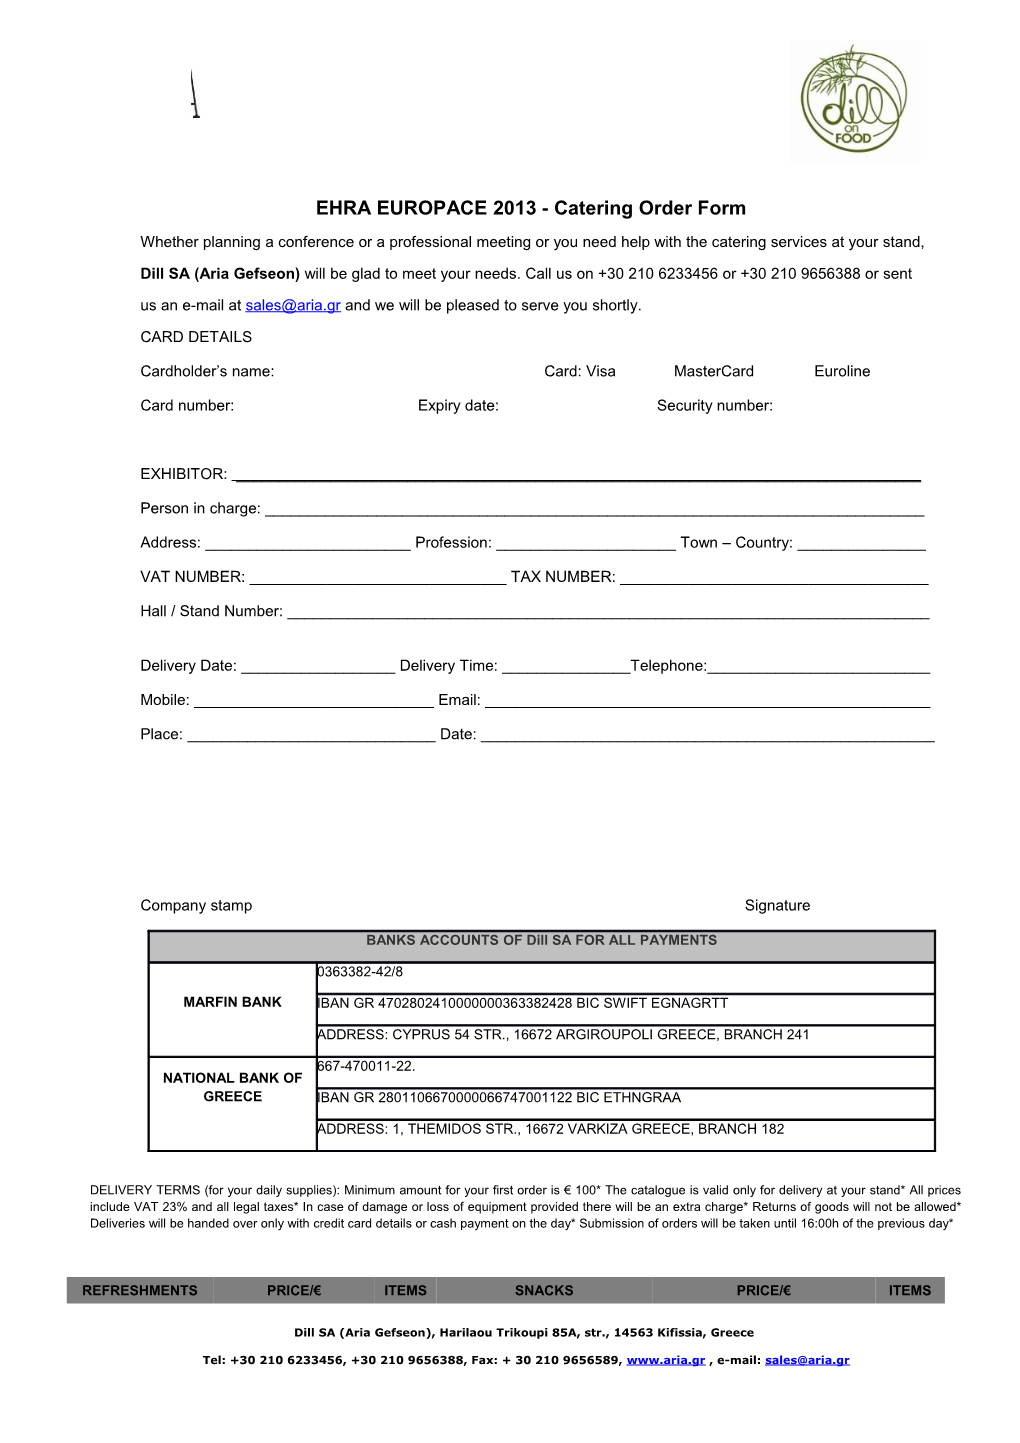 EHRA EUROPACE 2013 - Catering Order Form